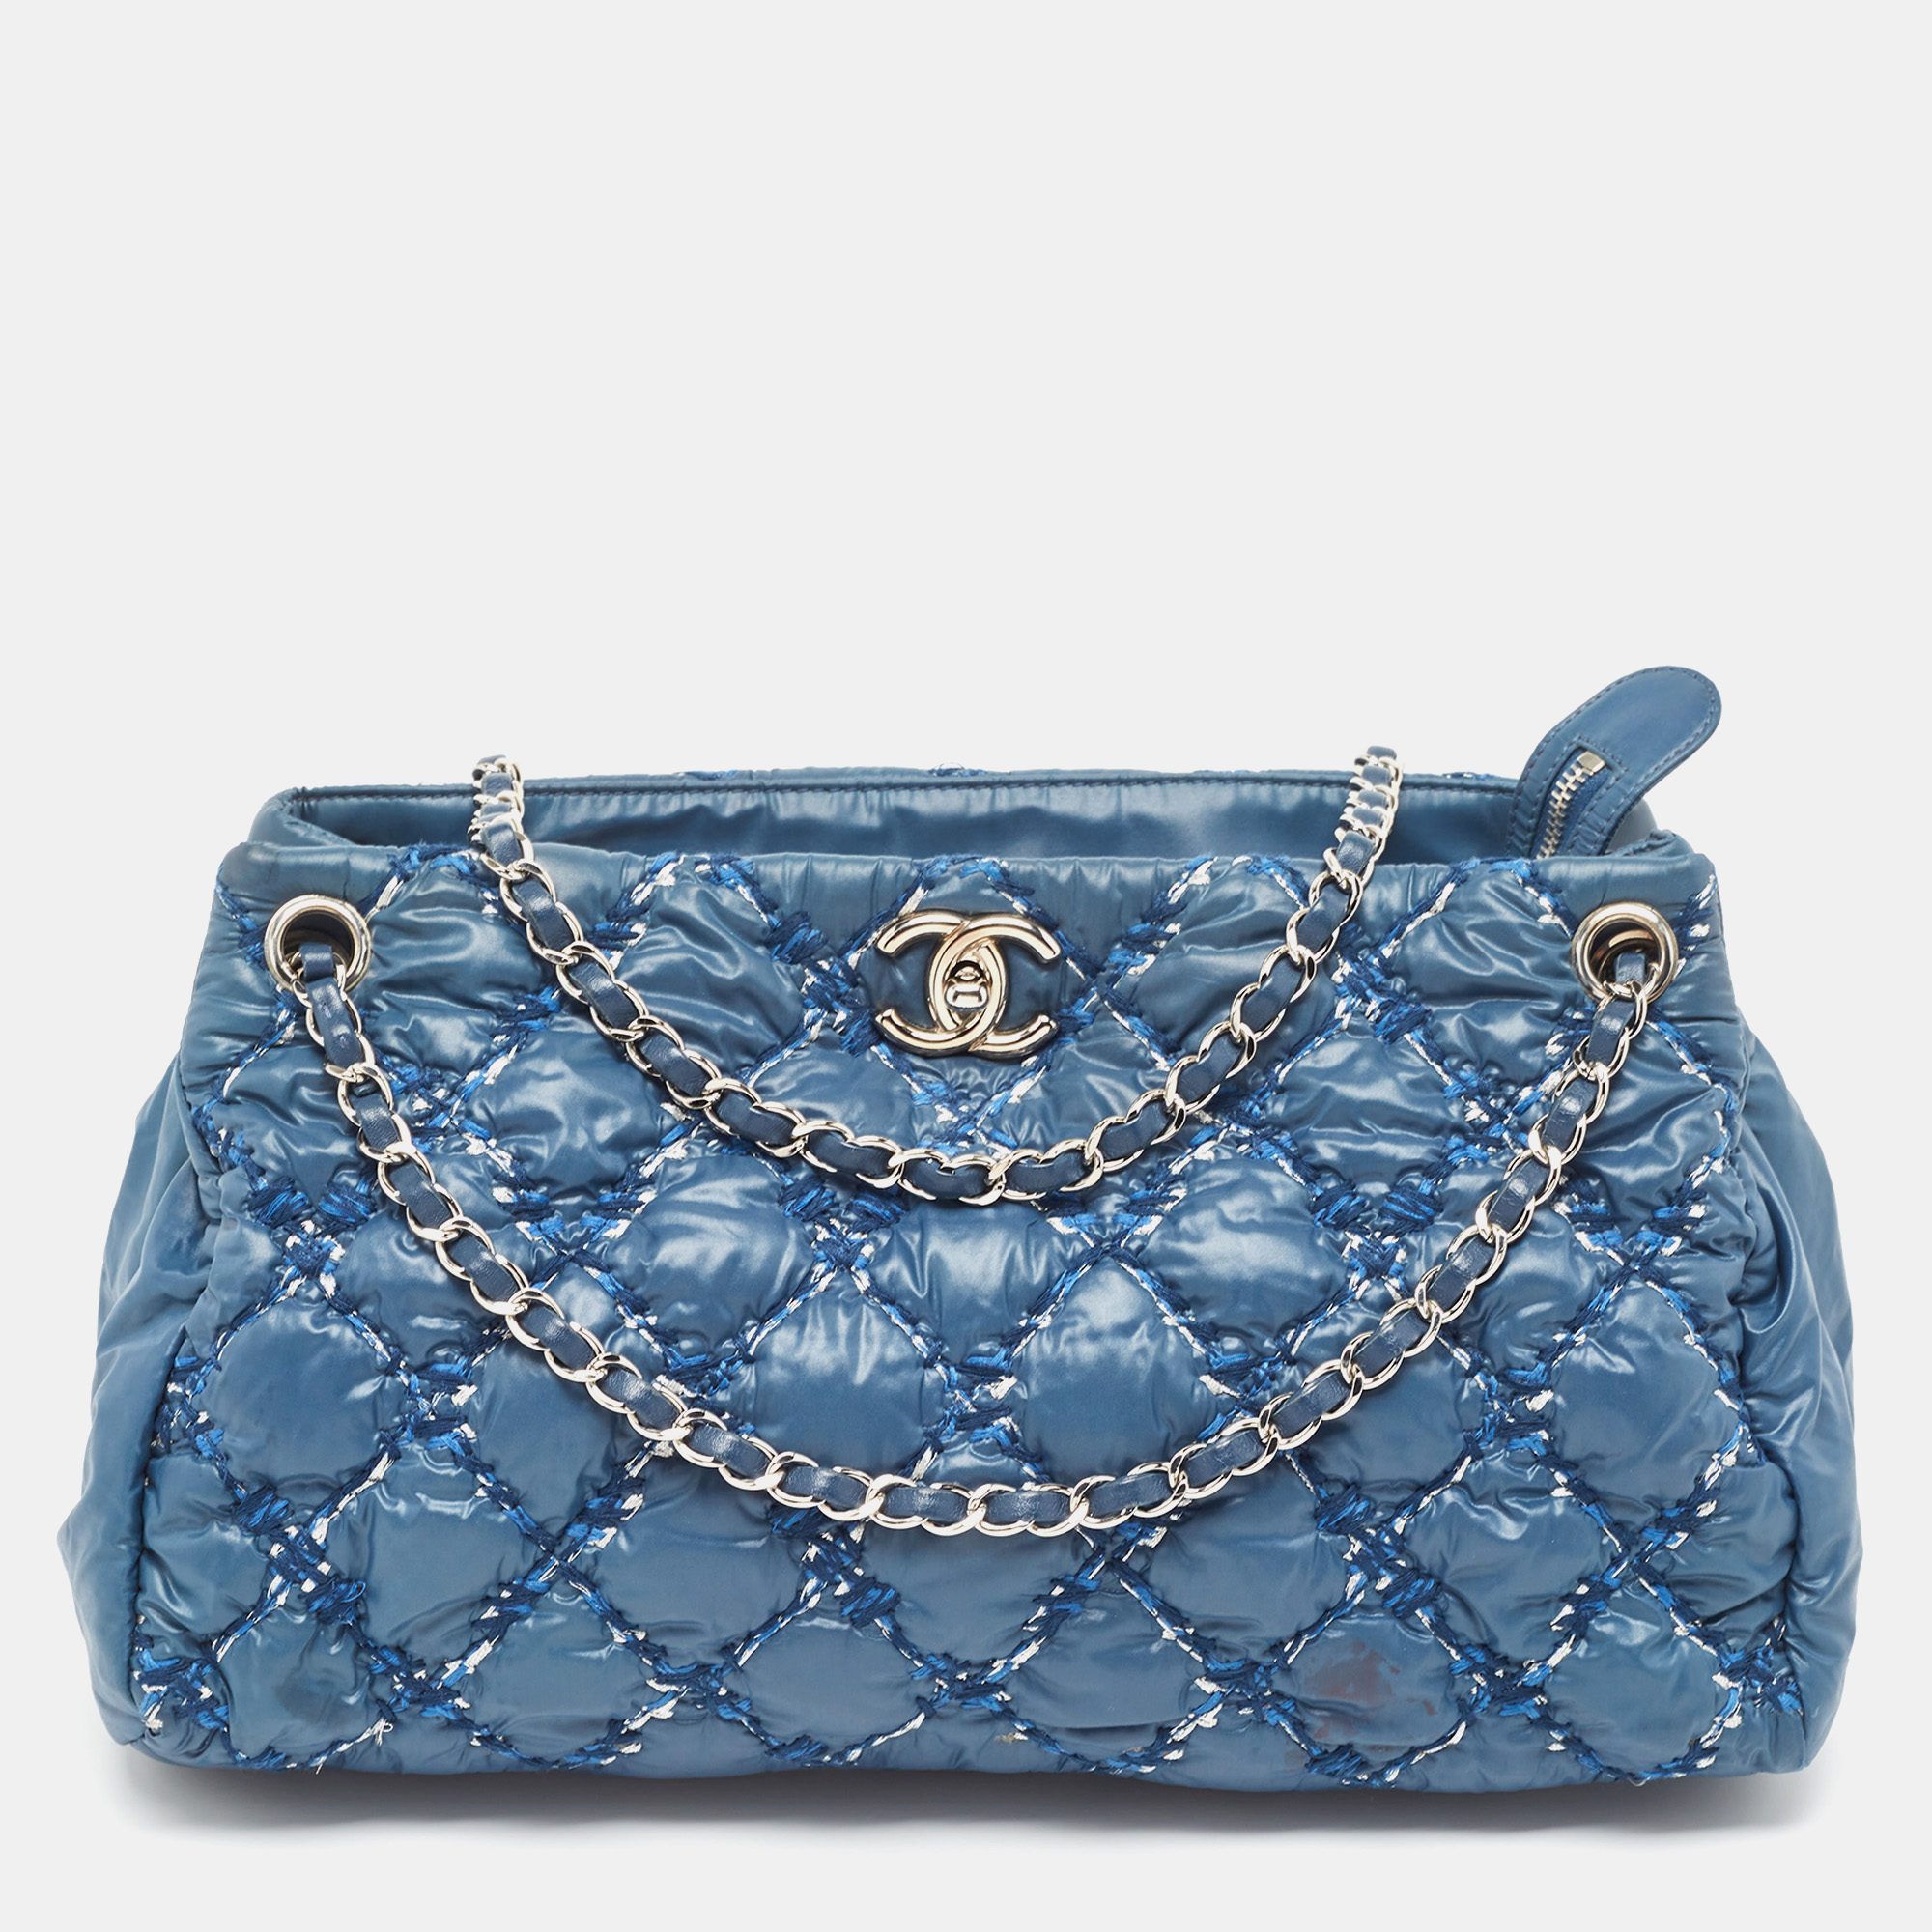 Chanel takes quilting design to the next level with this blue bubble tote that features unique stitching on the exterior to mimic the quilt design. Its so different and we love it The exterior is made of tweed and nylon giving the bag that puffy look. It also includes a chain link and a CC logo on the front.